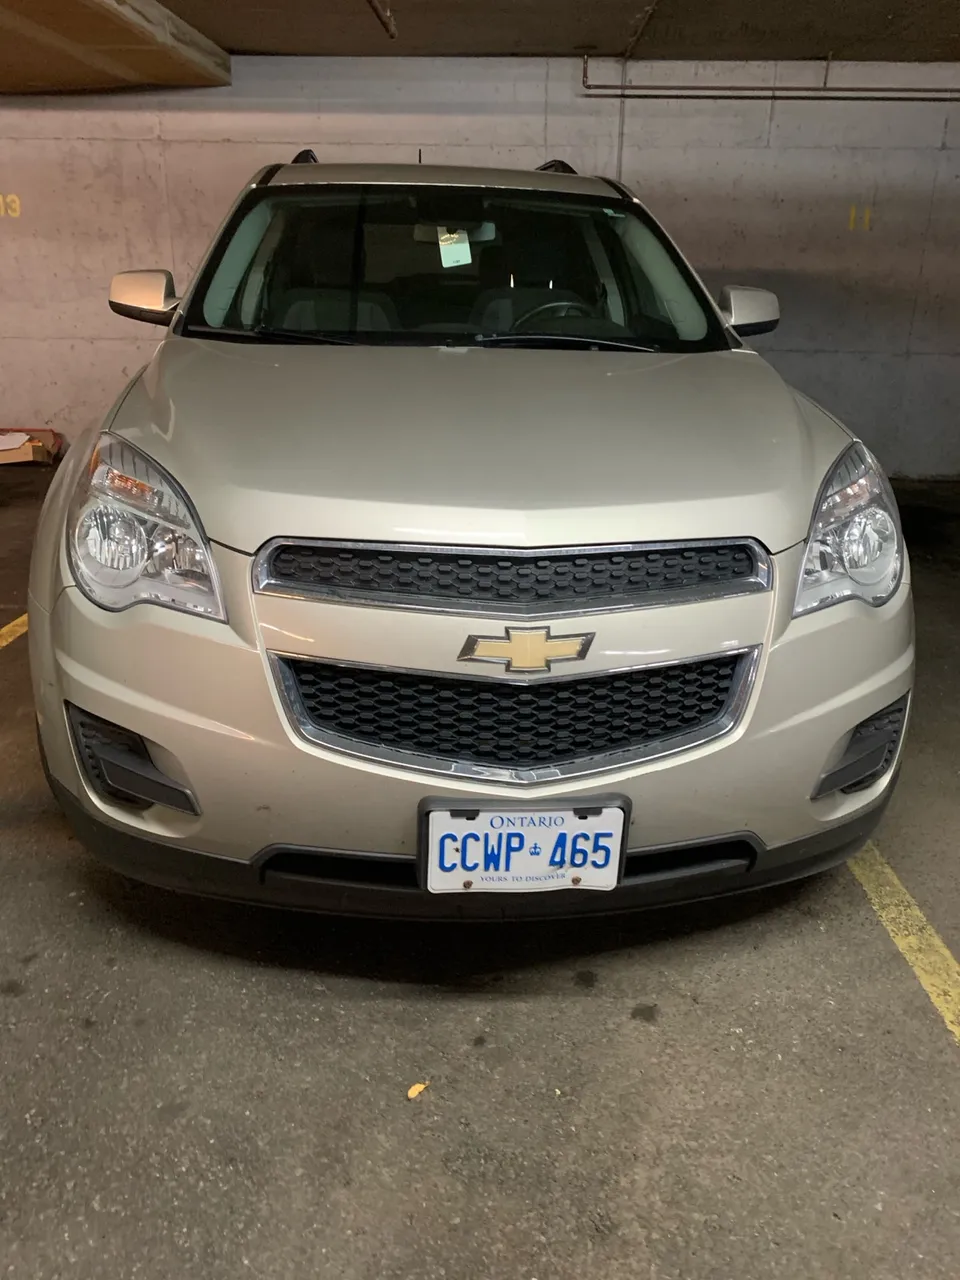 2015 Chevrolet Equinox with Ontario Plate